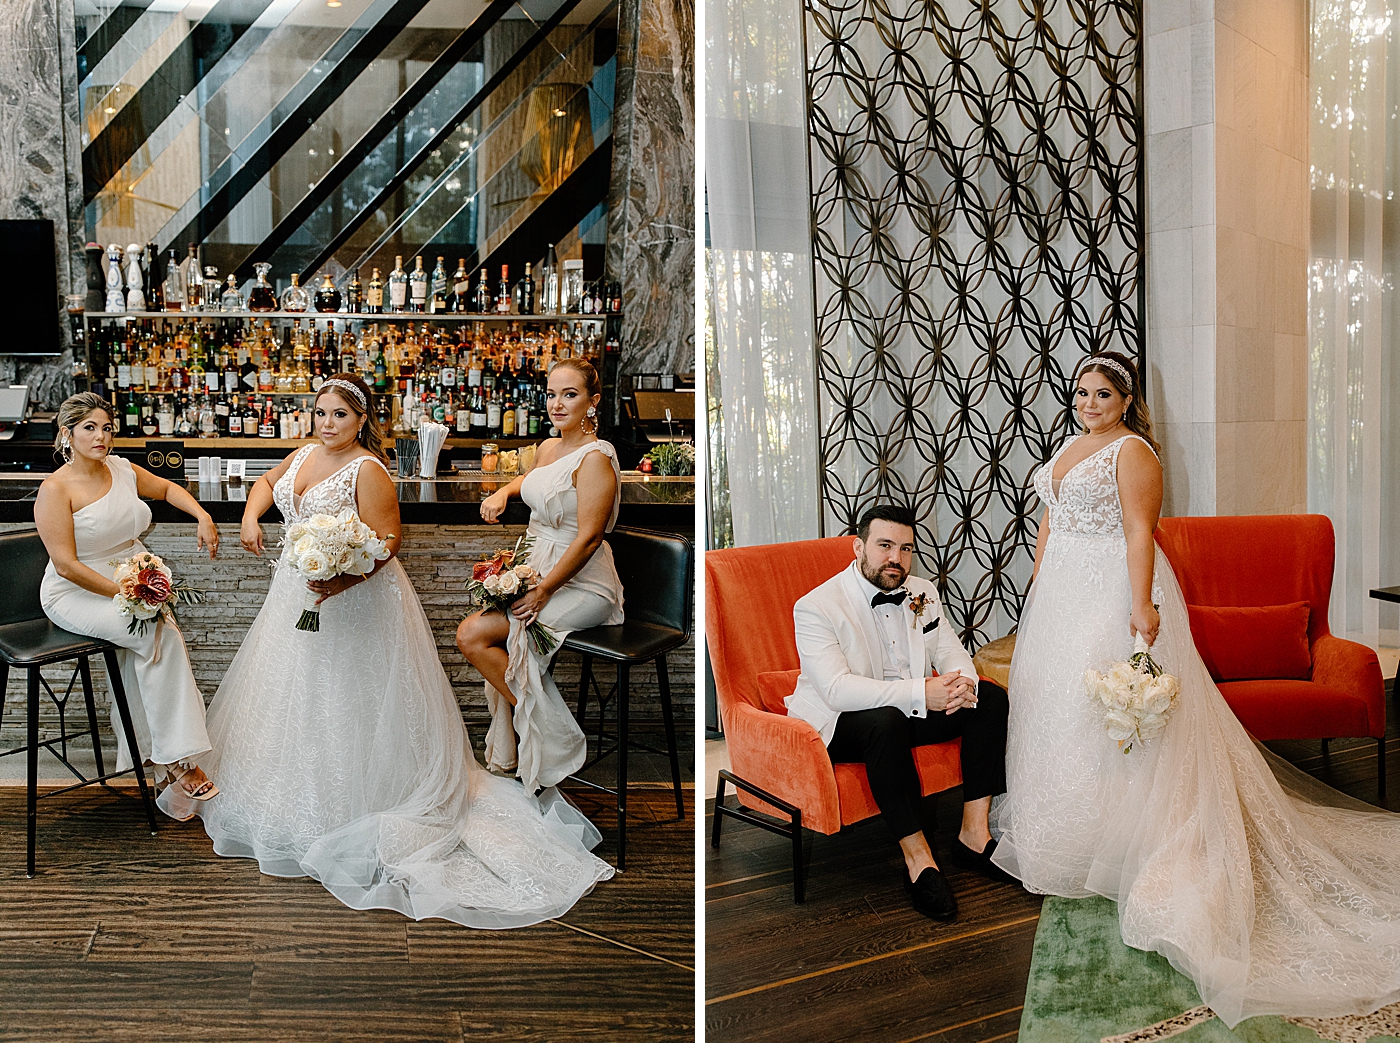 Bride and Bridesmaids posing at the bar and portrait of Groom sitting on red chair with Bride next to him Modern Elegant Wedding at The W South Beach captured by South Florida Wedding Photographer Erika Tuesta Photography